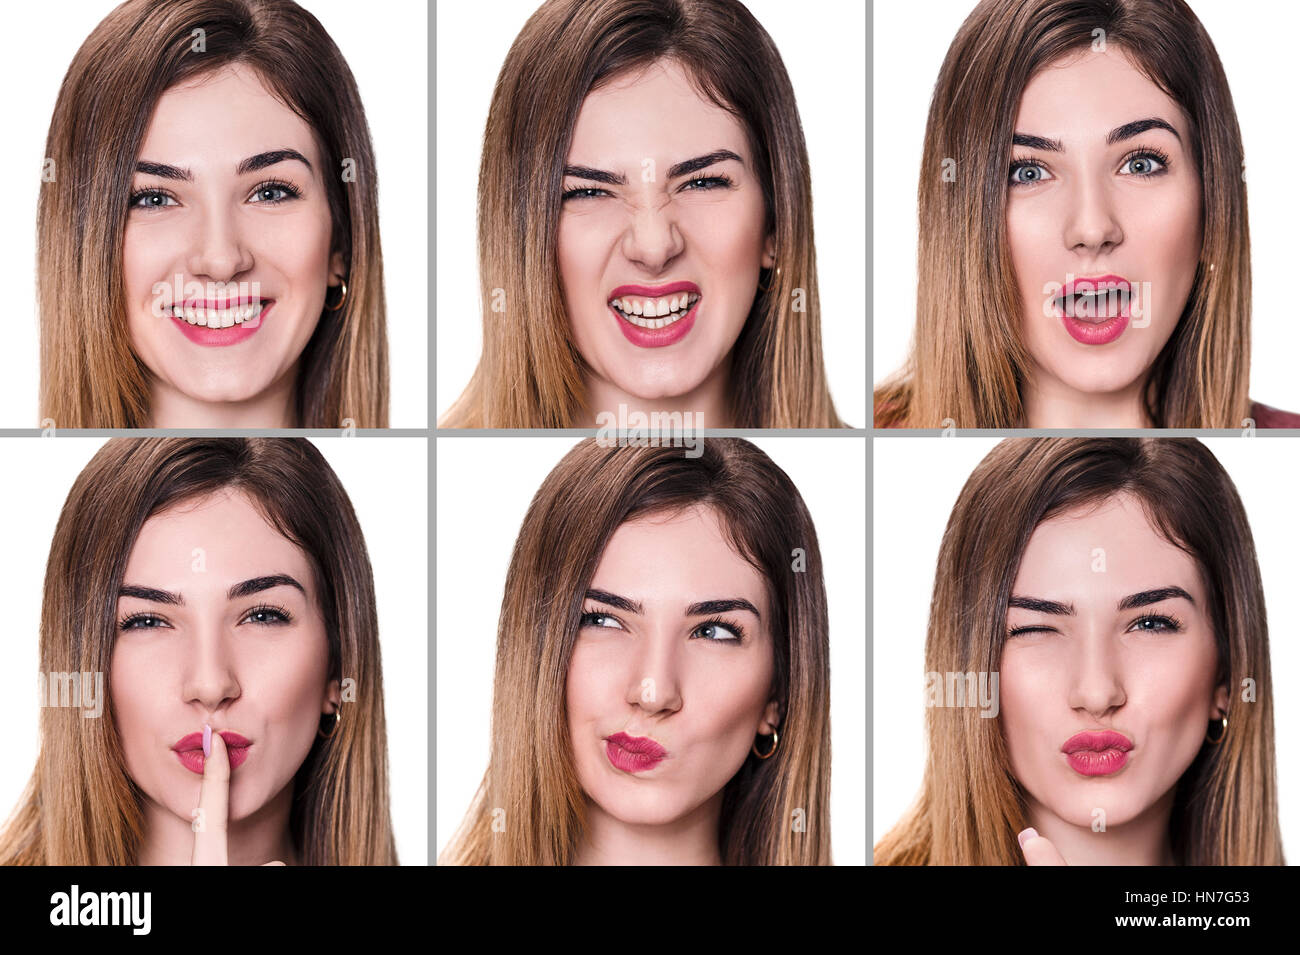 Collage of woman with different expressions Stock Photo